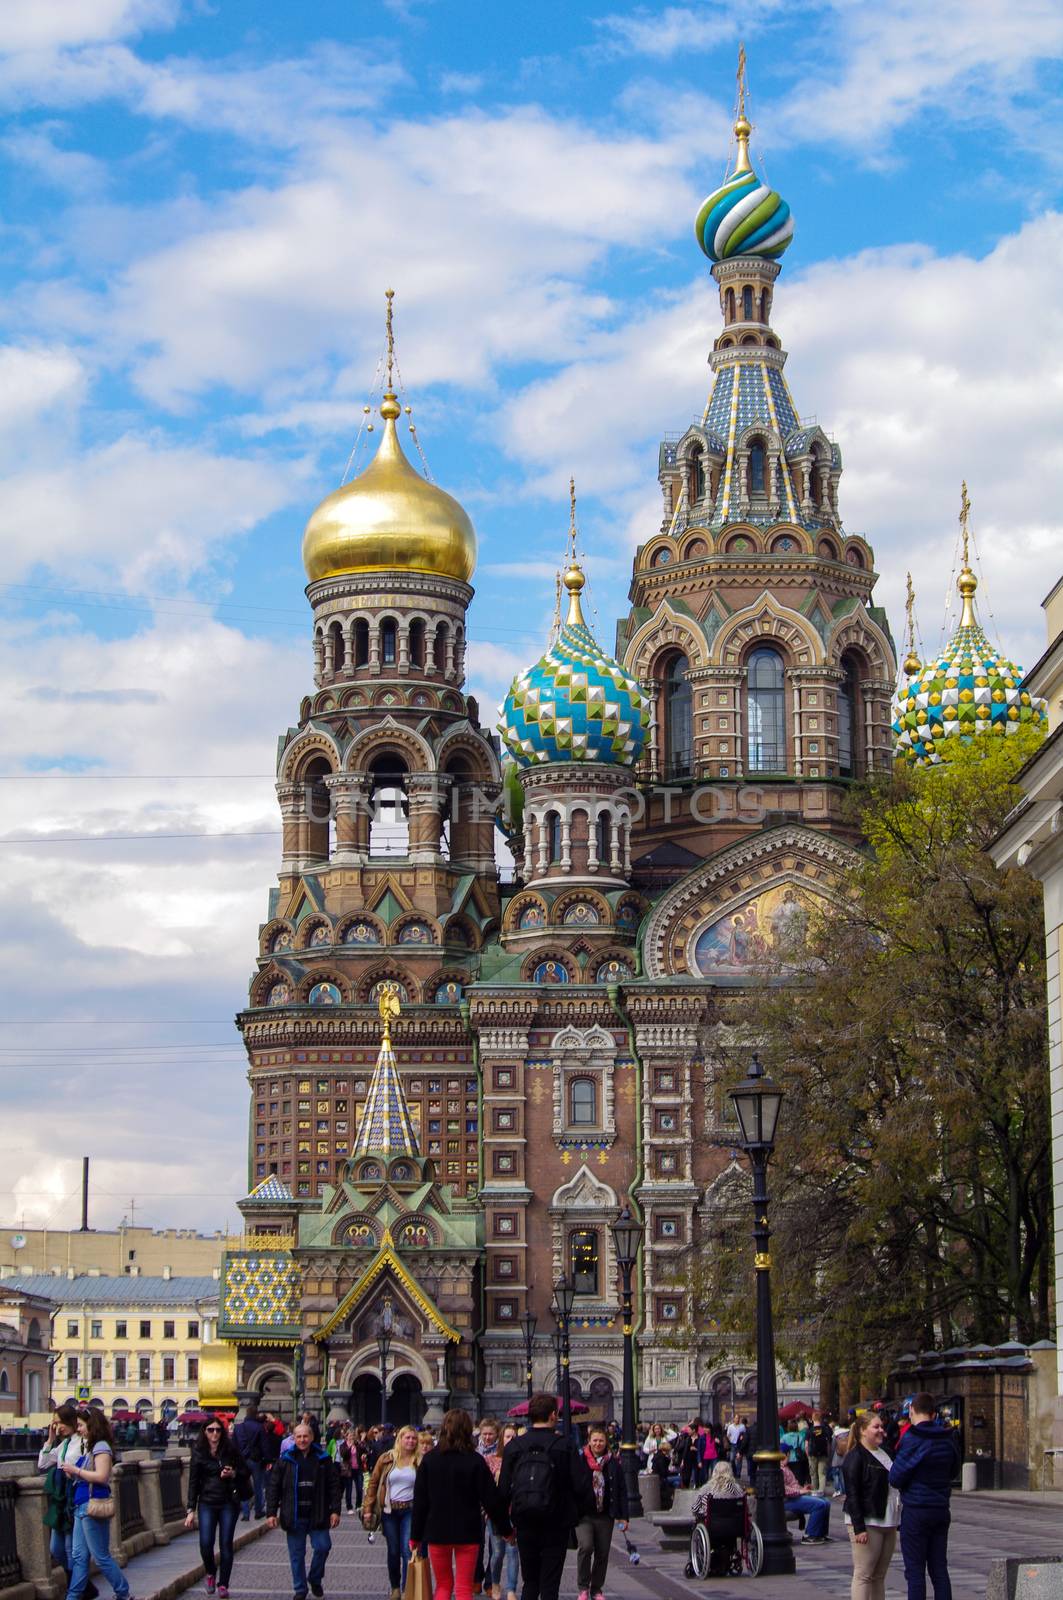 SAINT PETERSBURG, RUSSIA - MAI 10, 2014: walking people in front of church the Savior on Spilled Blood. Spas-na-krovi cathedral The cathedral Has rescued - on - blood 